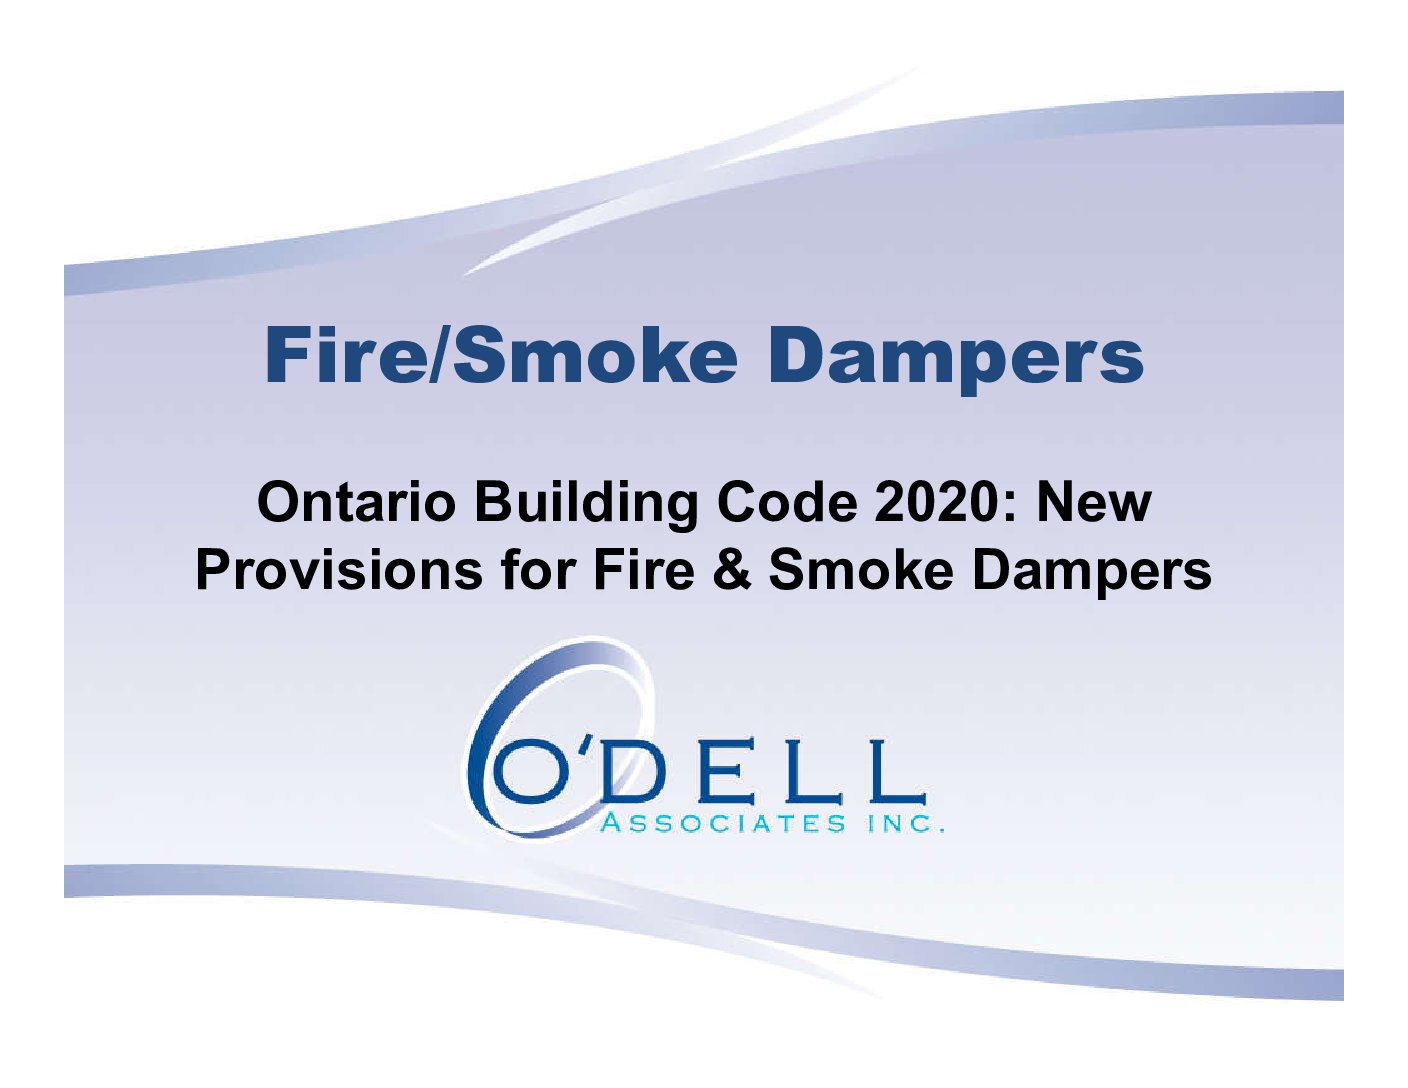 ODell_PPT Fire & Smoke Dampers